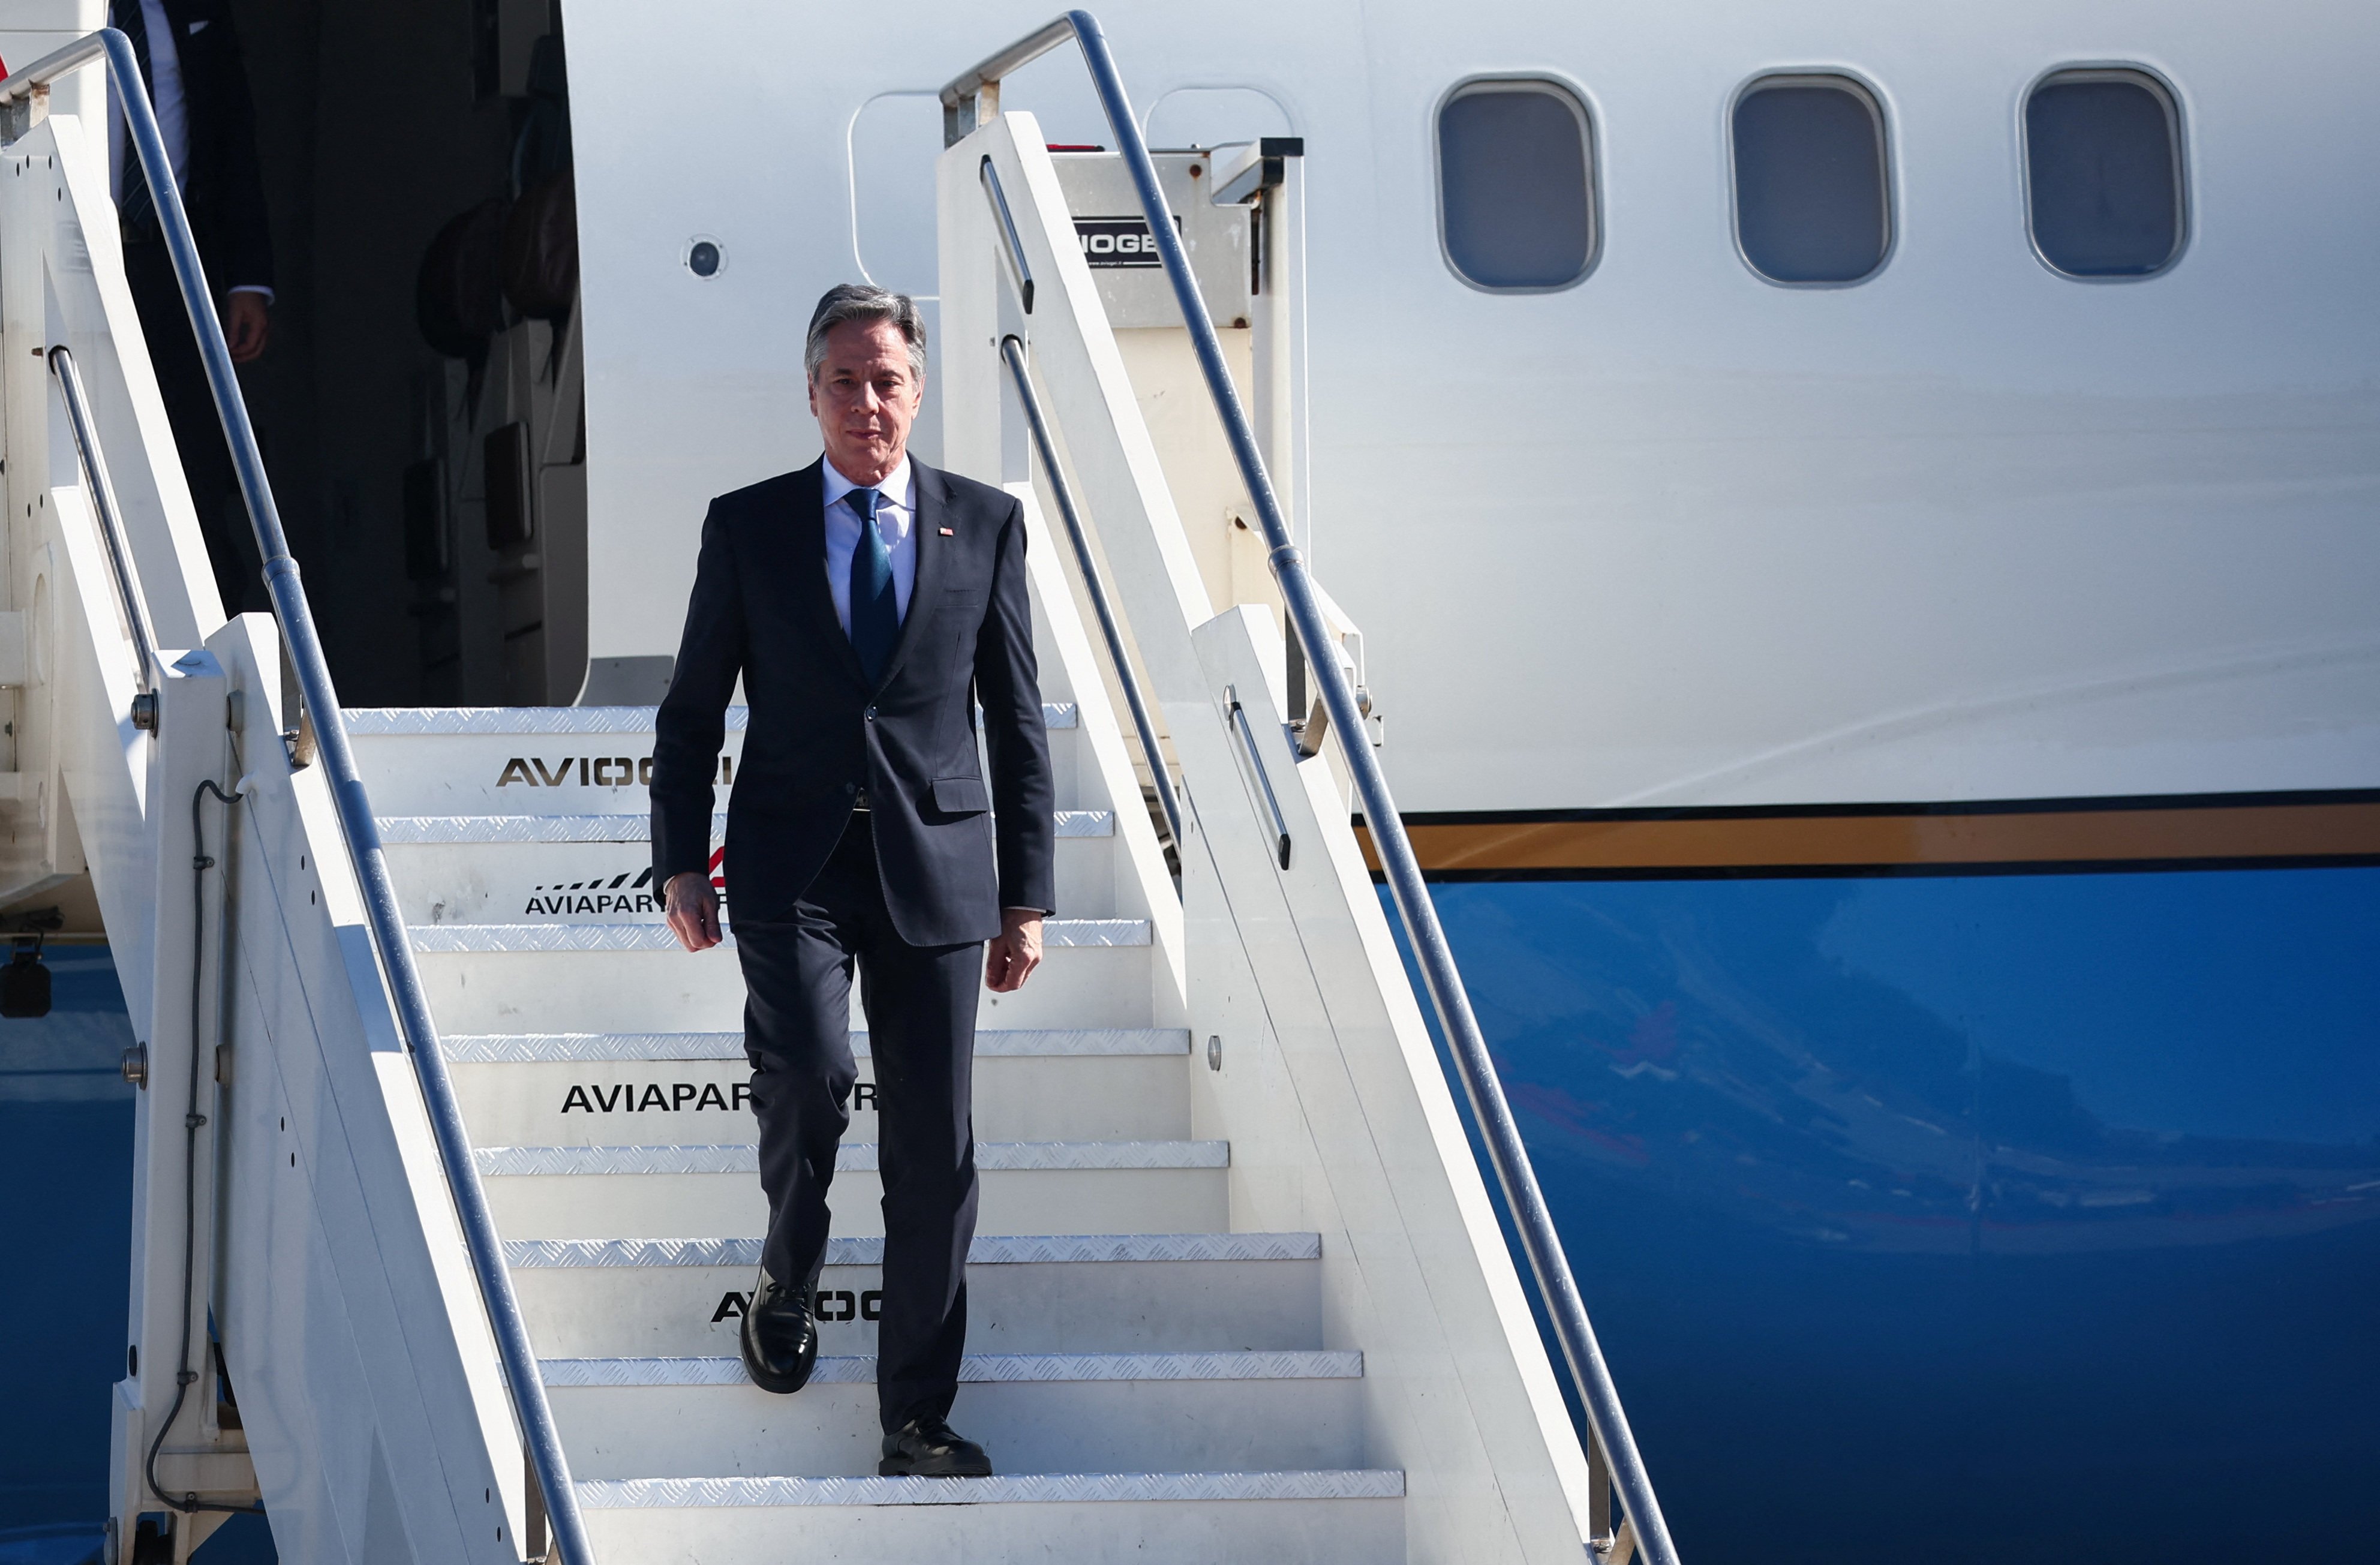 US Secretary of State Antony Blinken will be traveling to Brazil and Argentina next week, the State Department said. Photo: Reuters